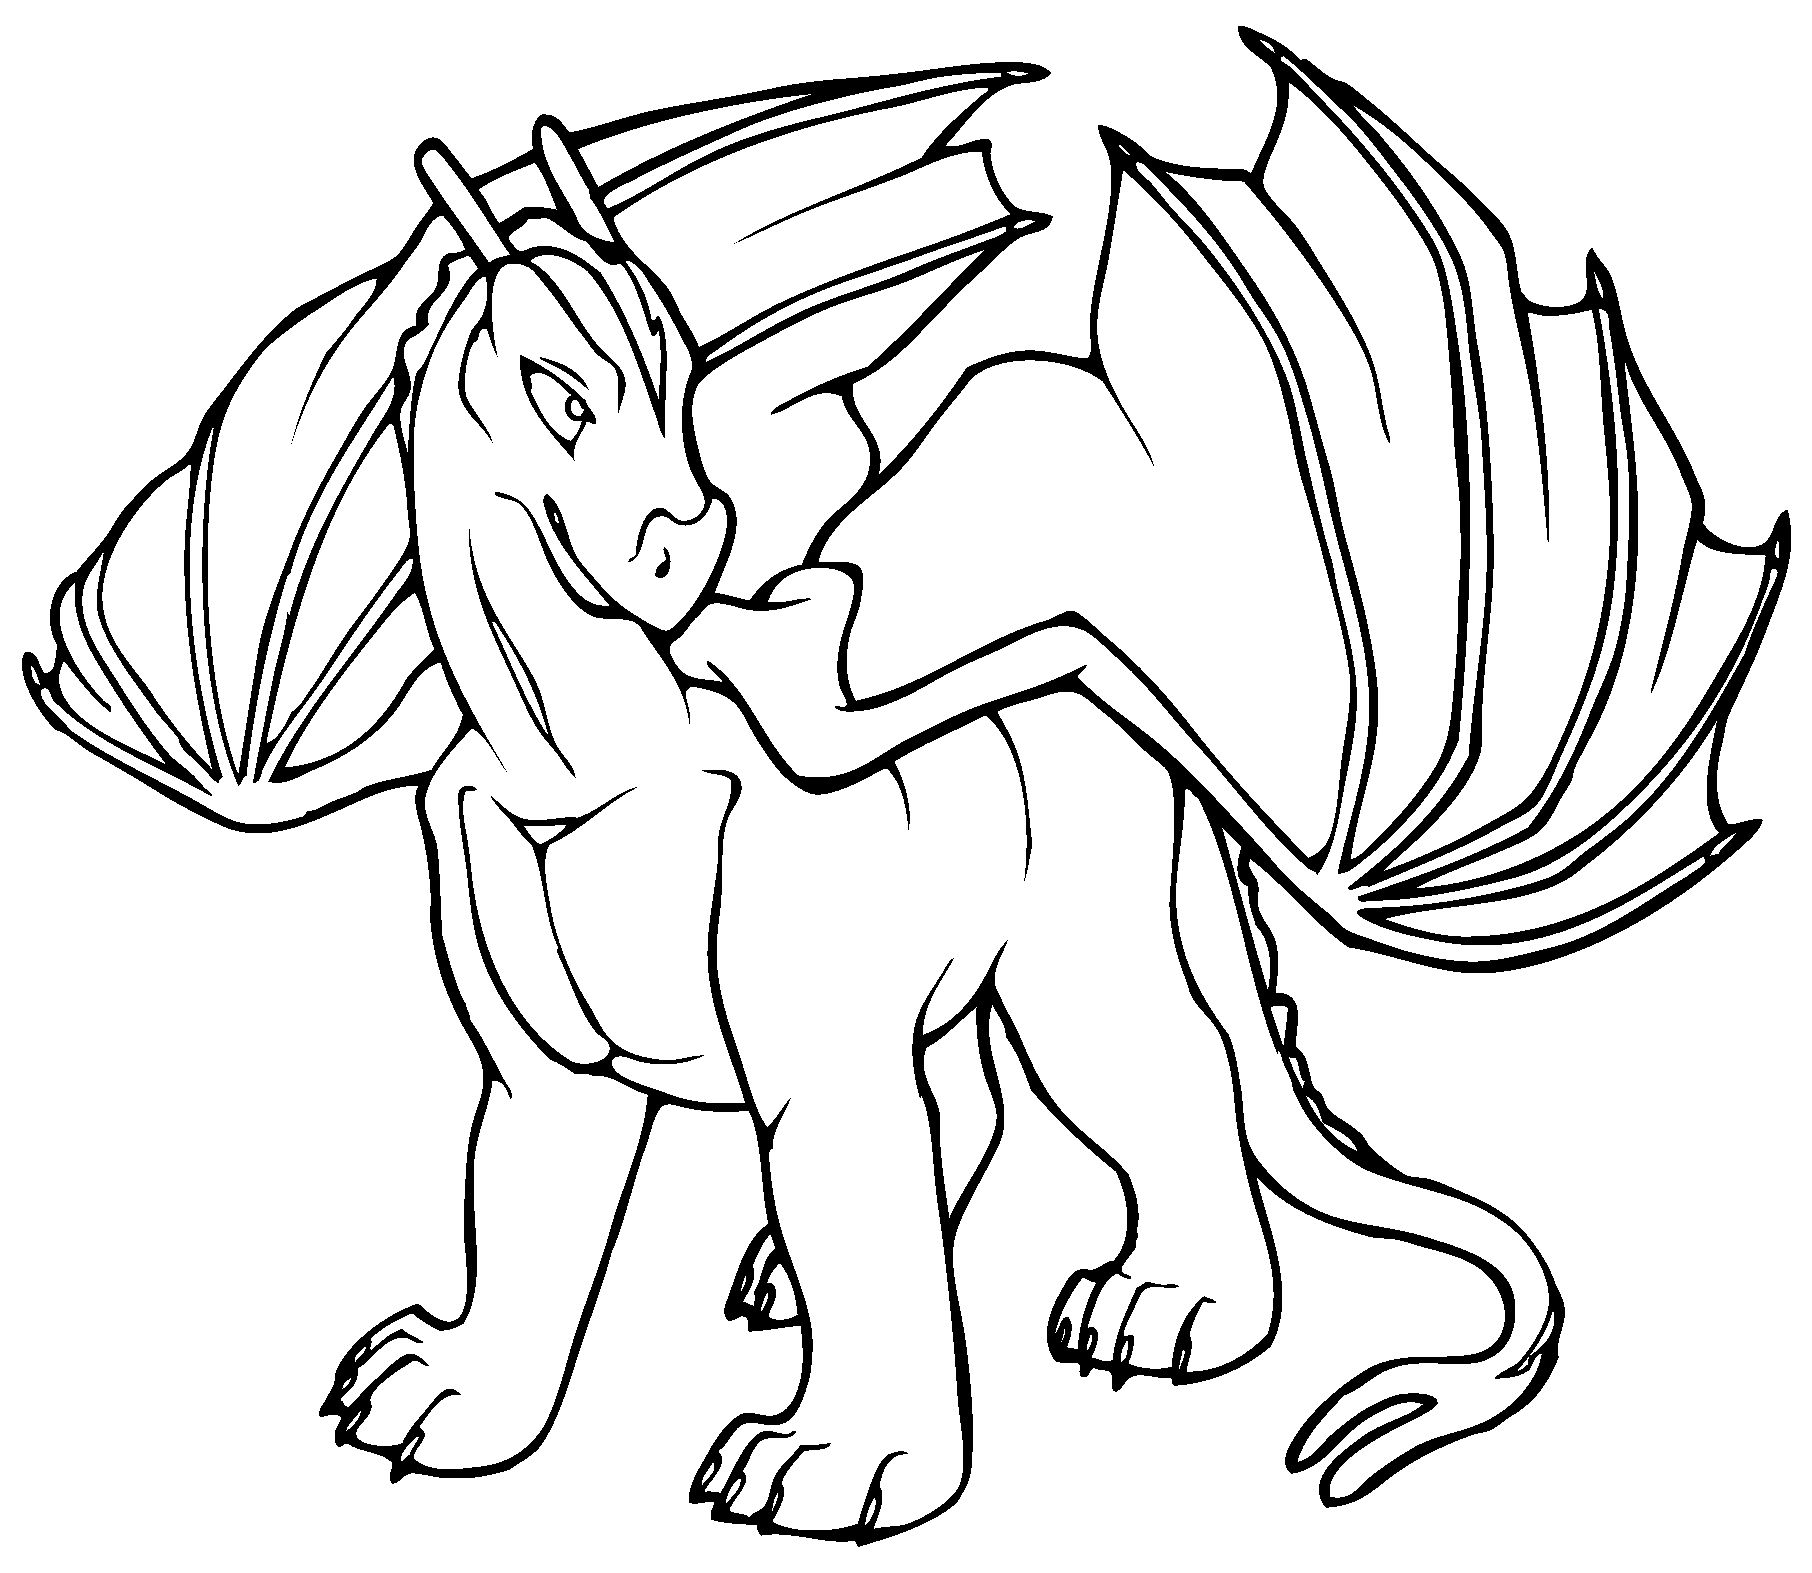 cartoon-dragon-coloring-pages-at-getcolorings-free-printable-colorings-pages-to-print-and